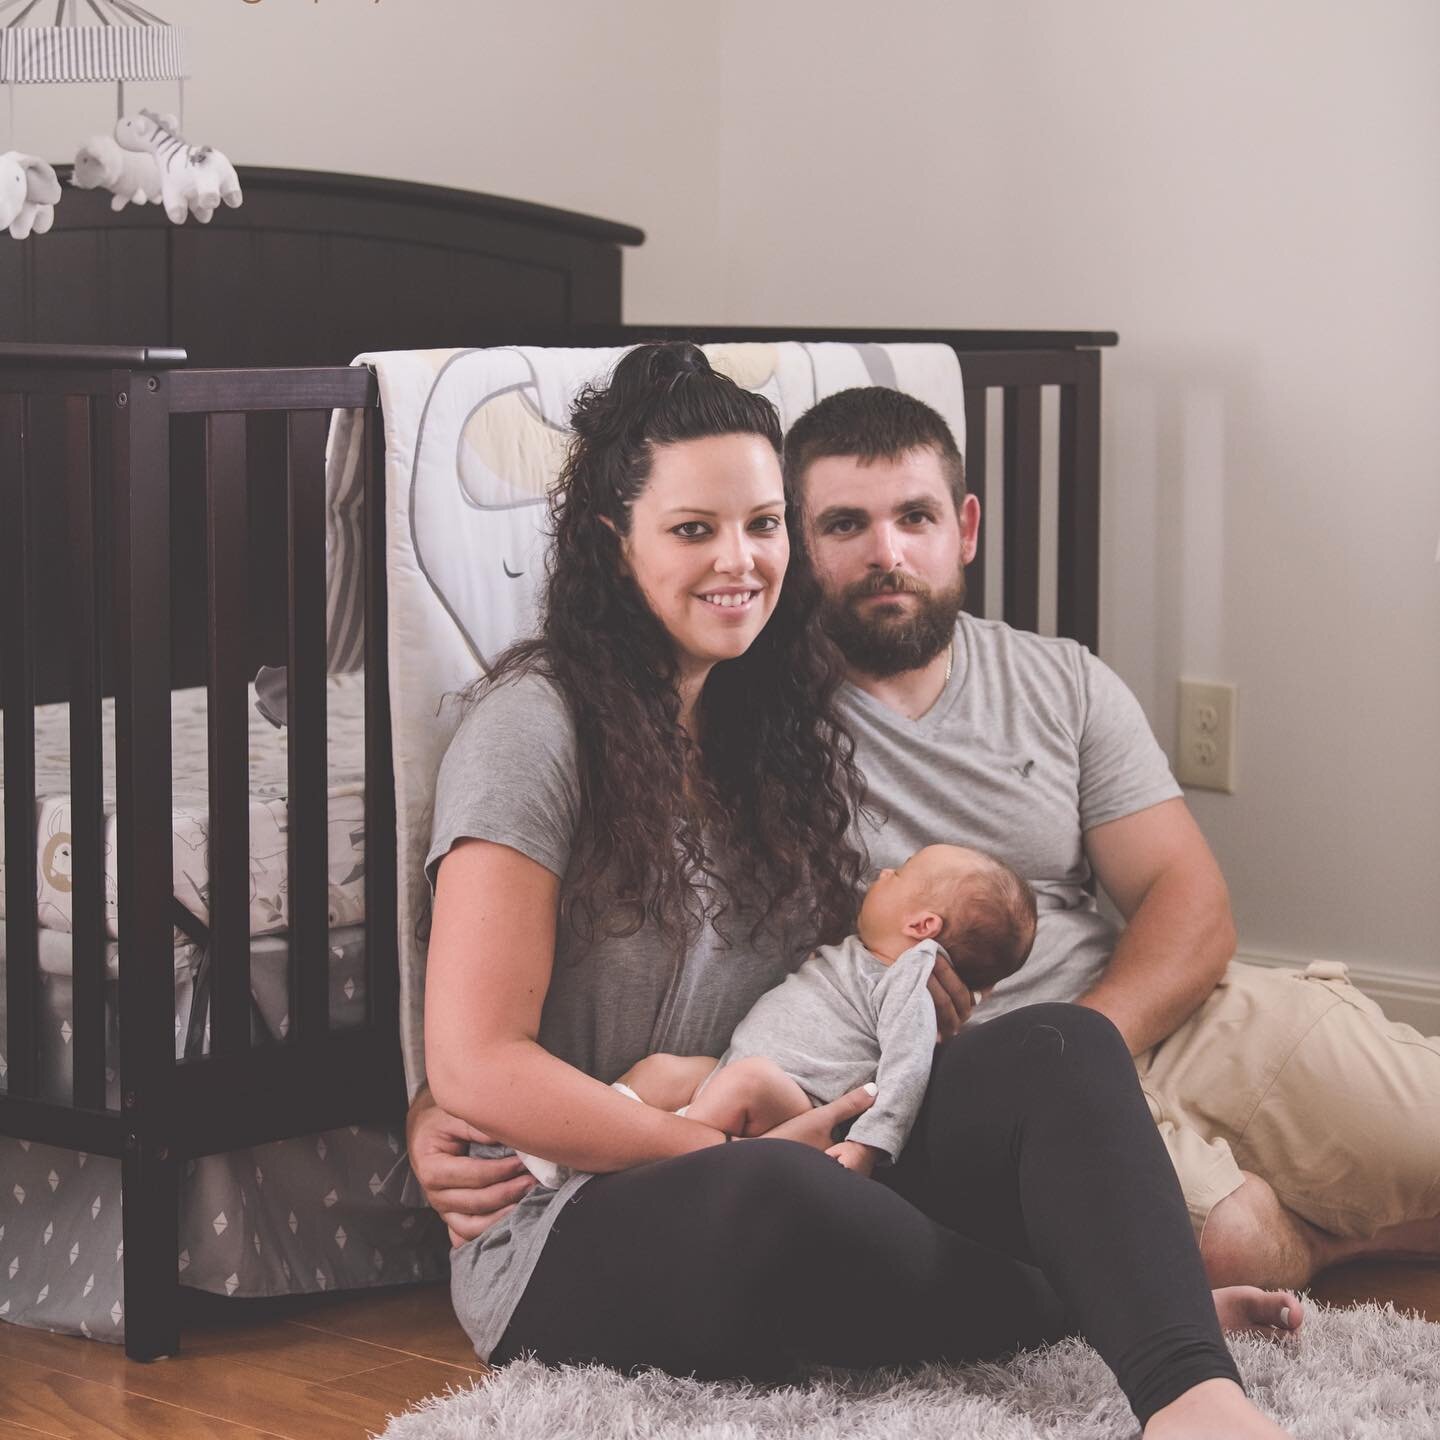 You just had a baby&mdash;
Yay! It&rsquo;s the happiest and scariest moment of your life! &amp;&amp; now you need to schedule a newborn session!
. . . . .
Traditional newborn sessions are great&mdash; but what if you didn&rsquo;t have to worry about 